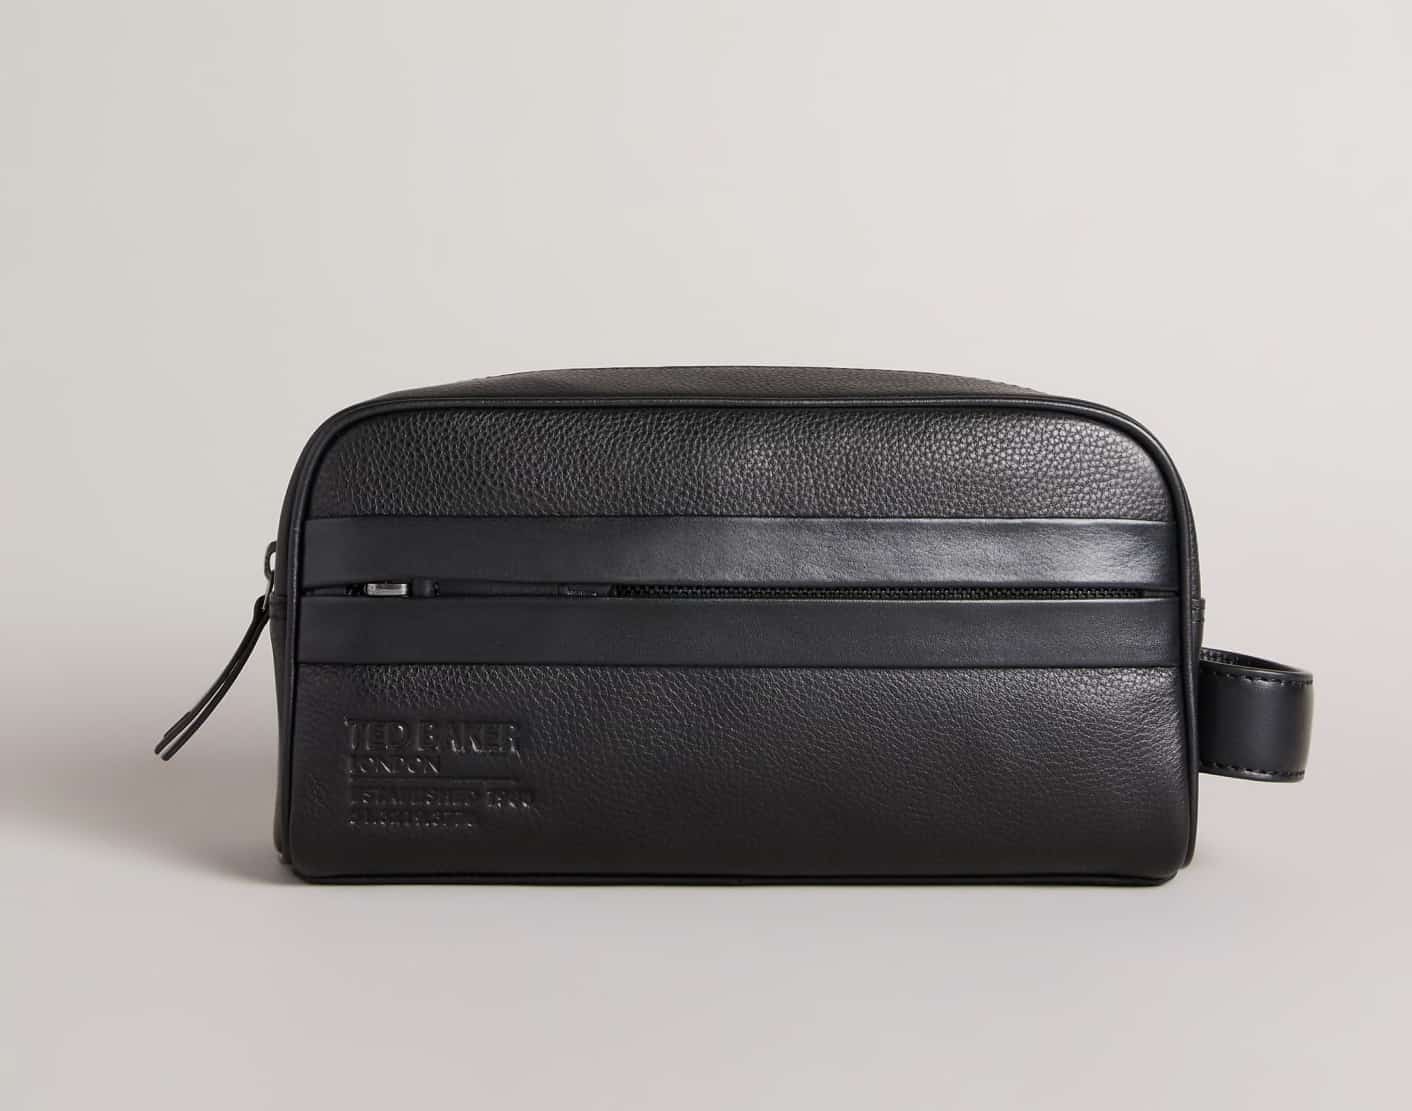 image of a black leather Ted Baker toiletry bag with a zipper and embossed logo